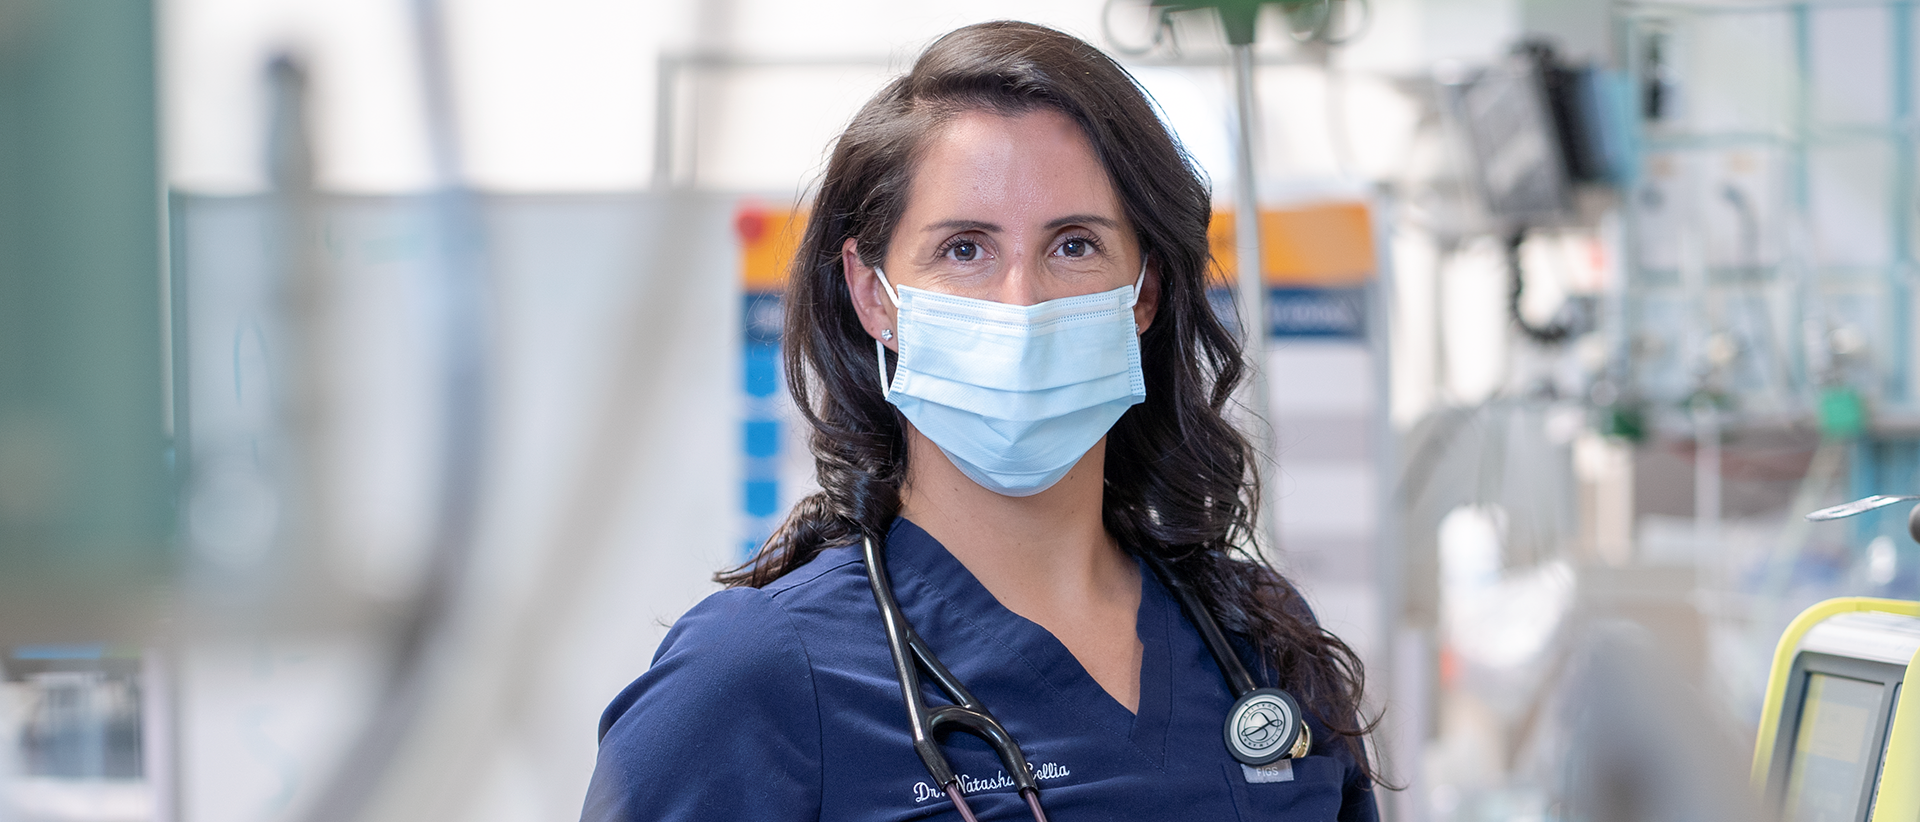 Dr. Natasha Collia in a mask with a stethoscope around her neck. There is a variety of hospital equipment out of focus in the background.